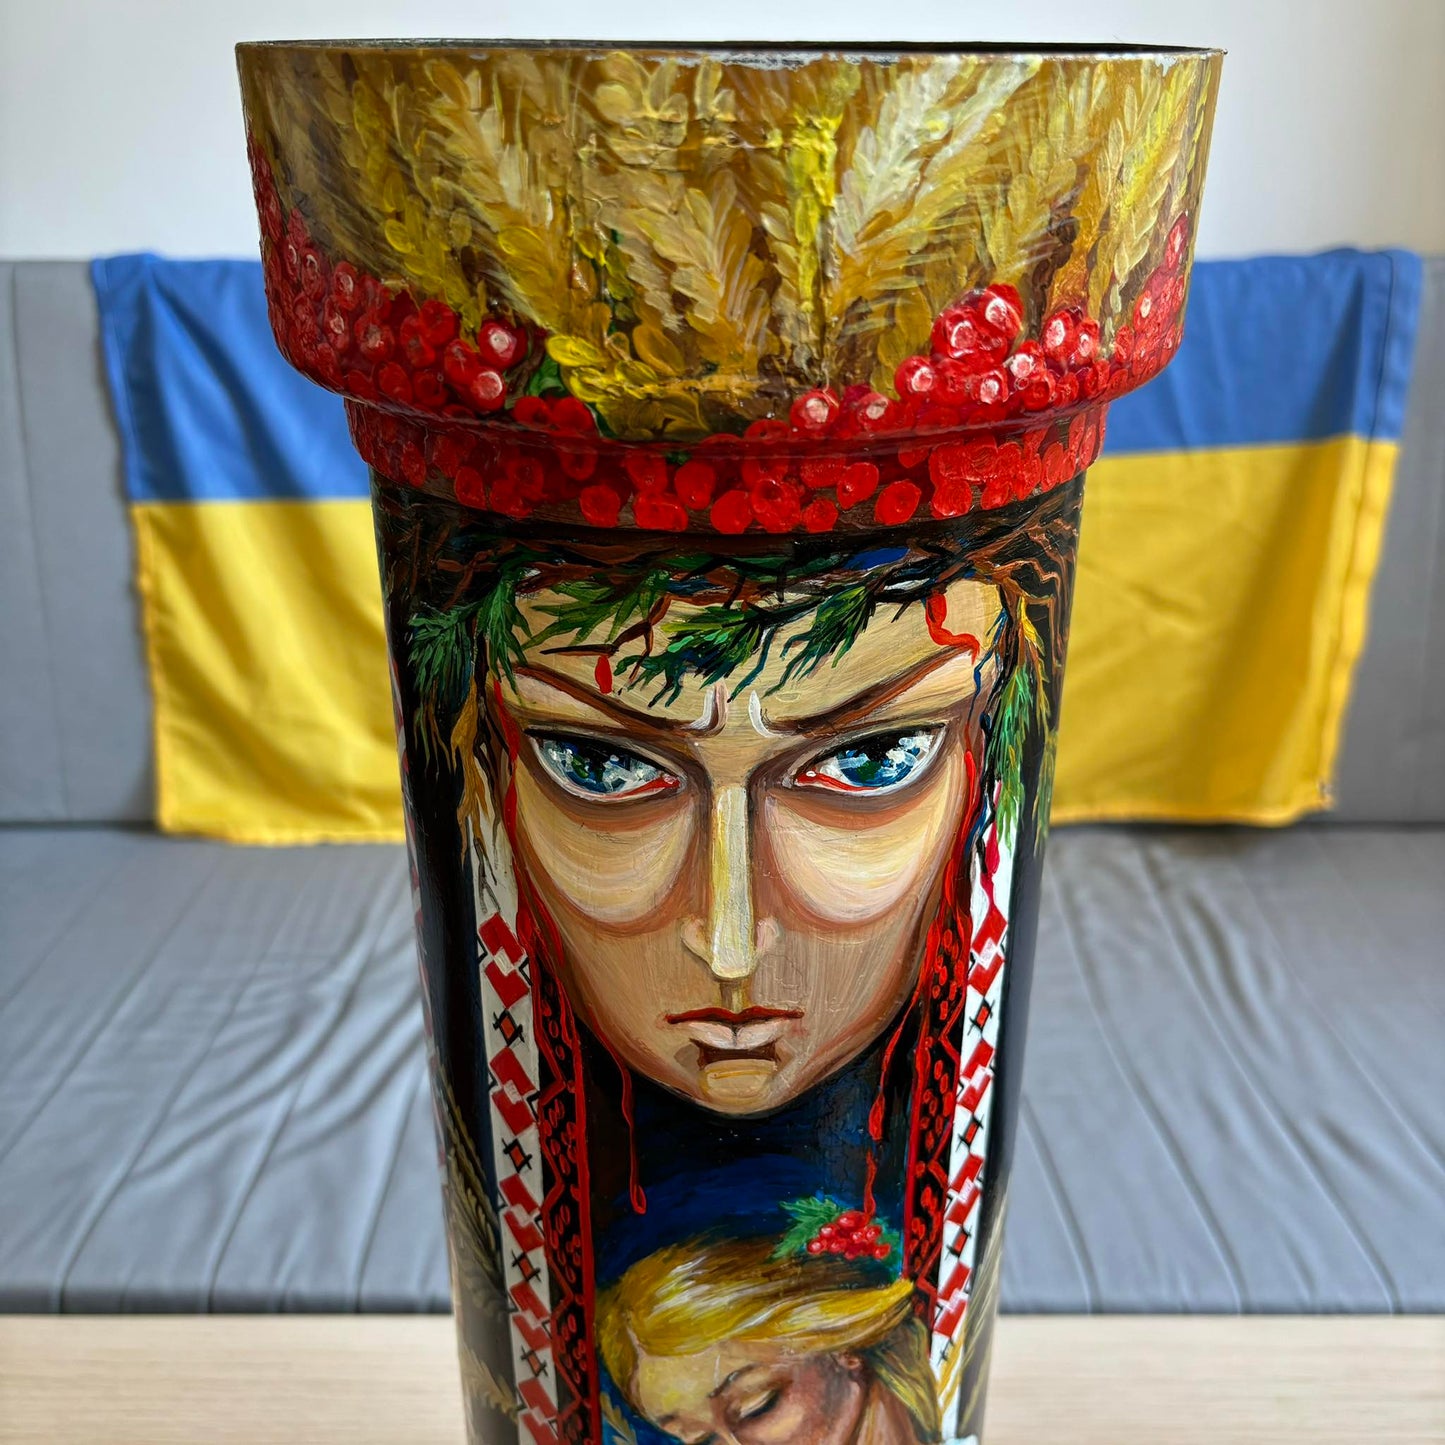 Painted 155mm Shell Container (Tribute to the 93rd Brigade "Kholodnyi Yar")